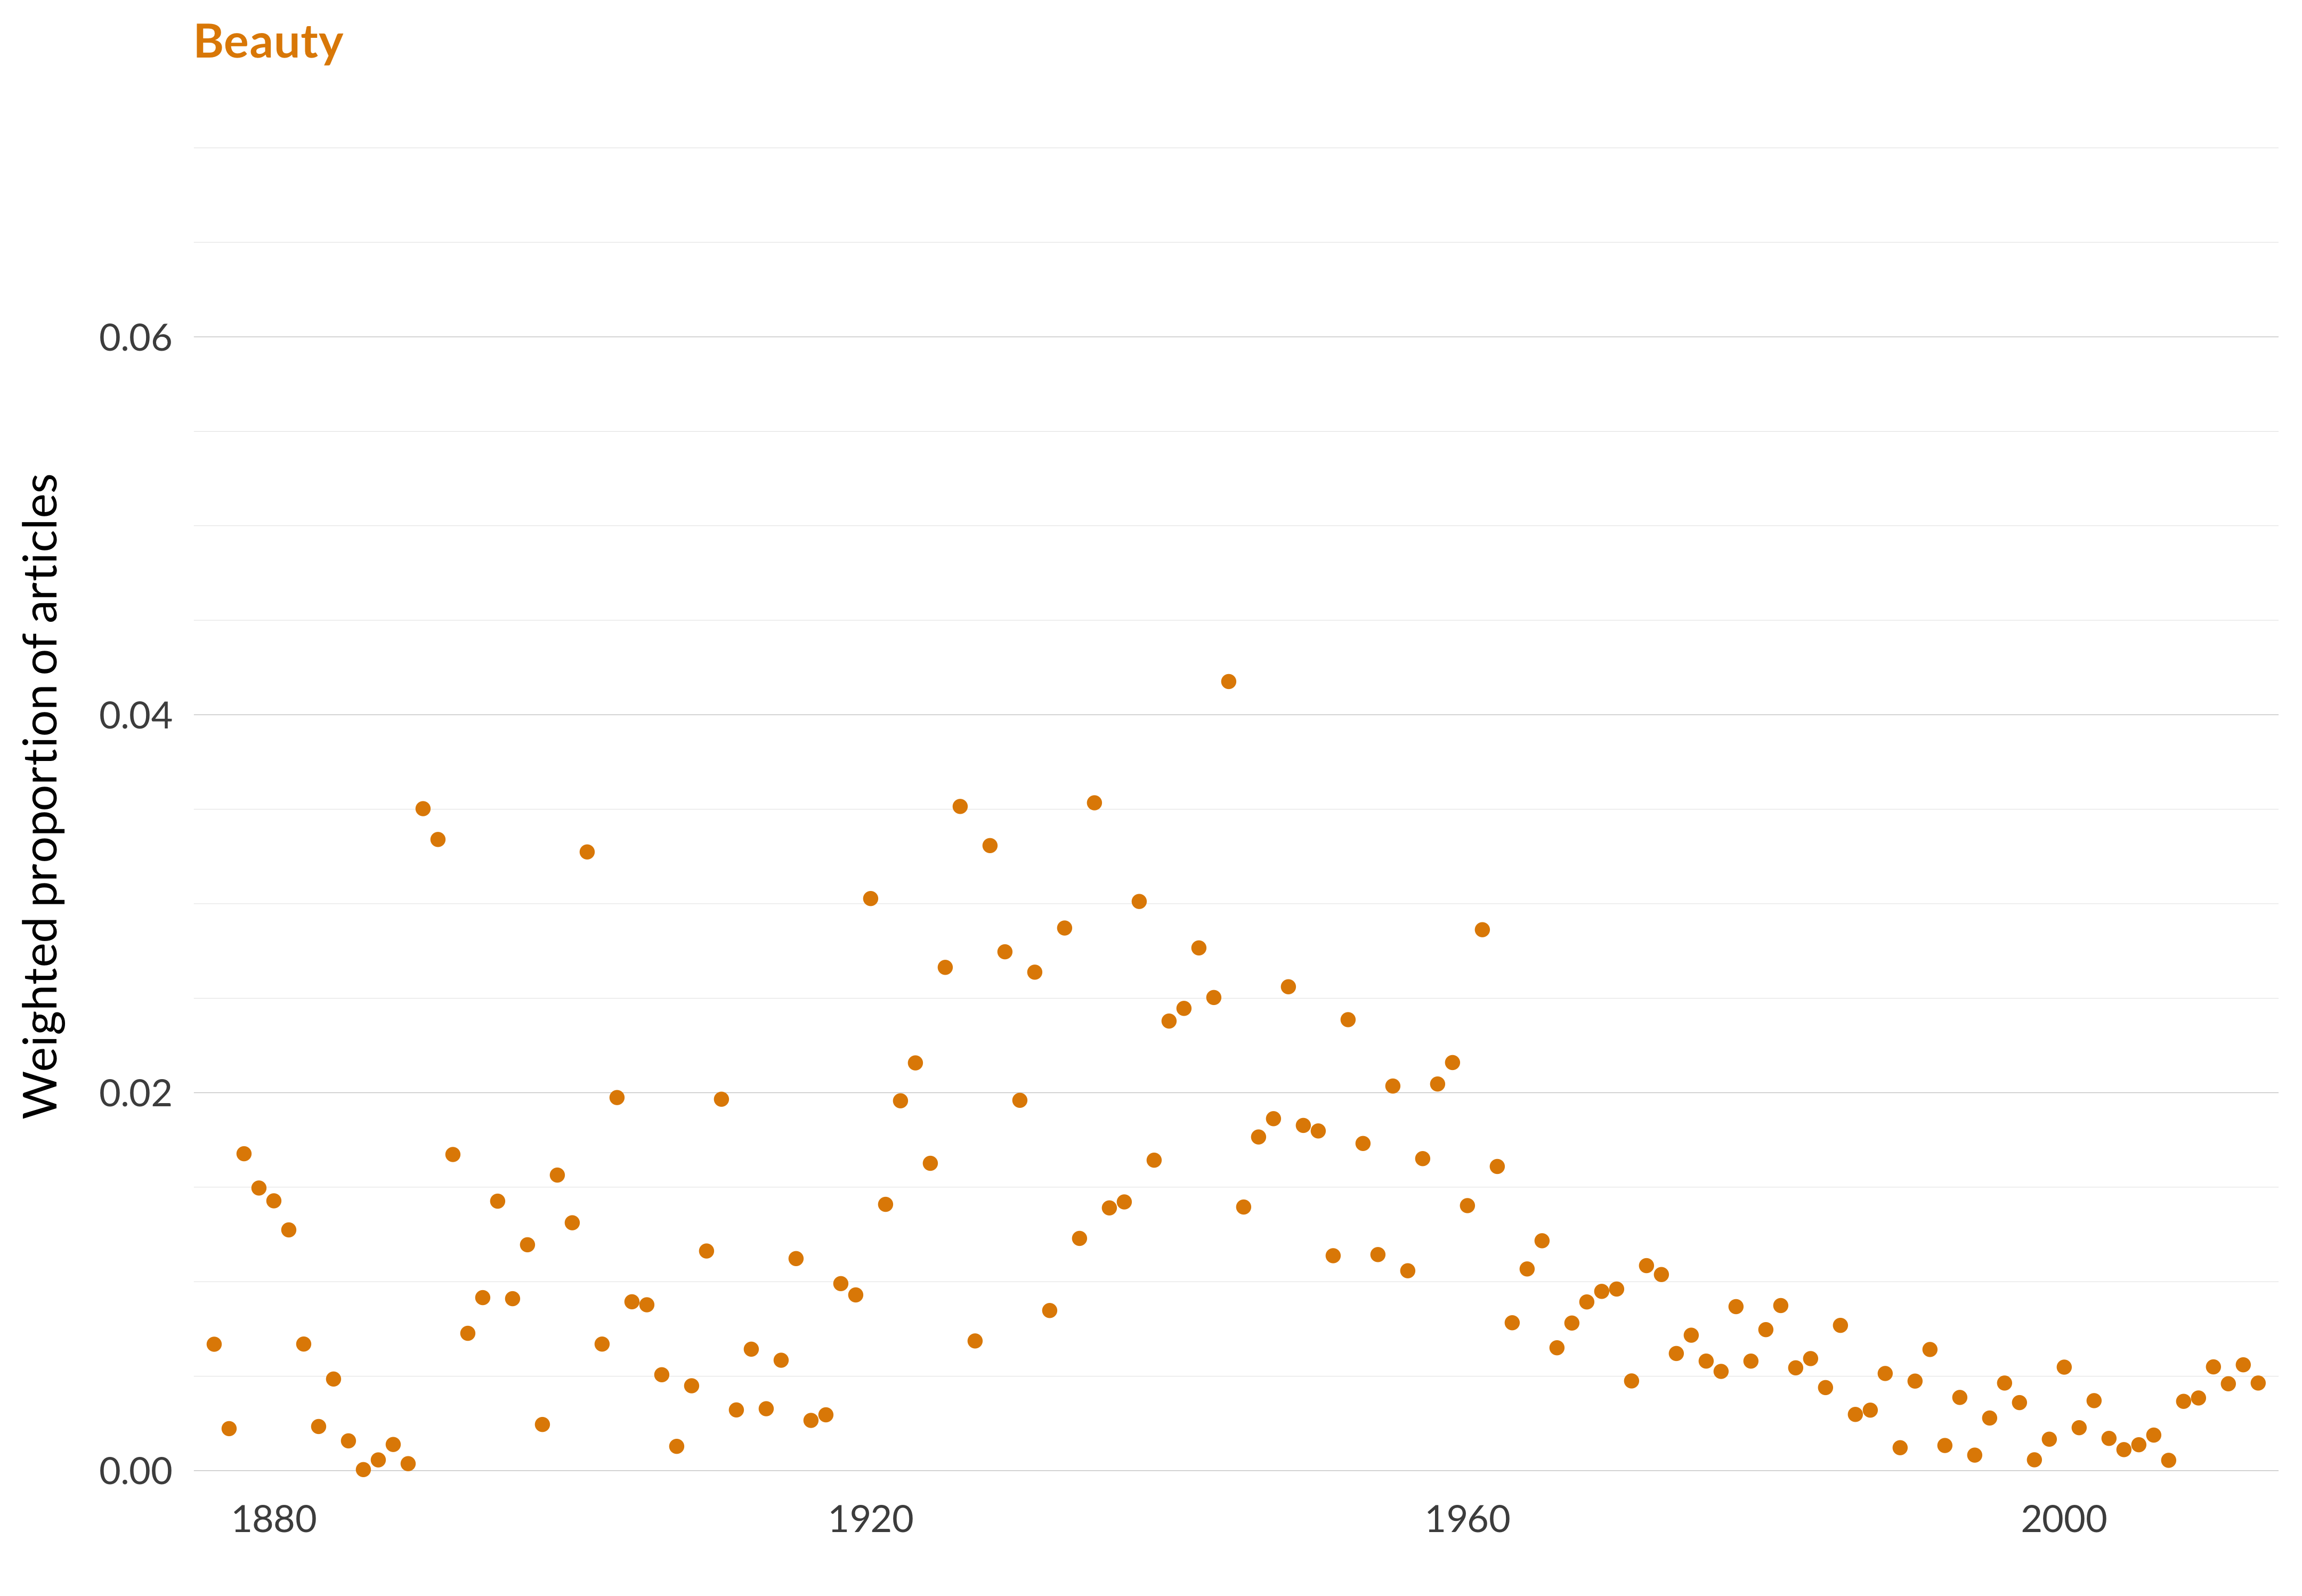 A scatterplot showing which proportion of articles each year are in the beautytopic. The x-axis shows the year, the y-axis measures the proportion of articles each year in this topic. There is one dot per year. The highest value is in 1944 when 4.2% of articles were in this topic. The lowest value is in 1886 when 0.0% of articles were in this topic. The full table that provides the data for this graph is available in Table A.8 in Appendix A.